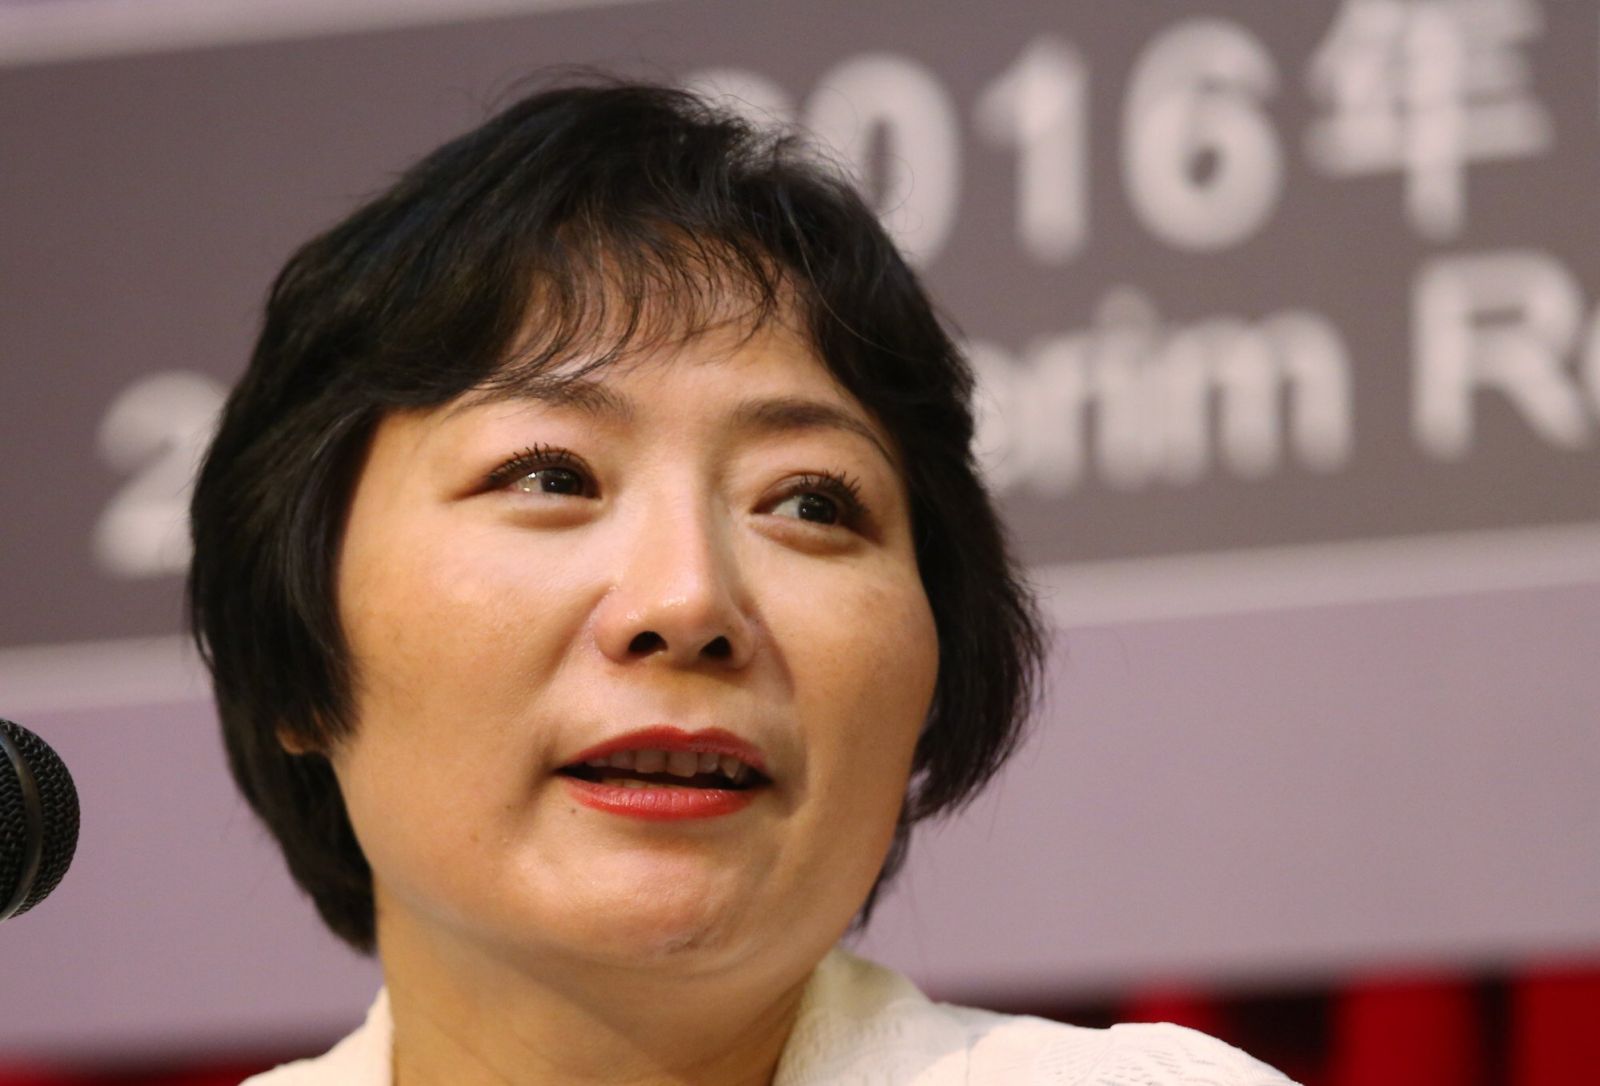 Female property tycoon has sailed through the property slump in China: